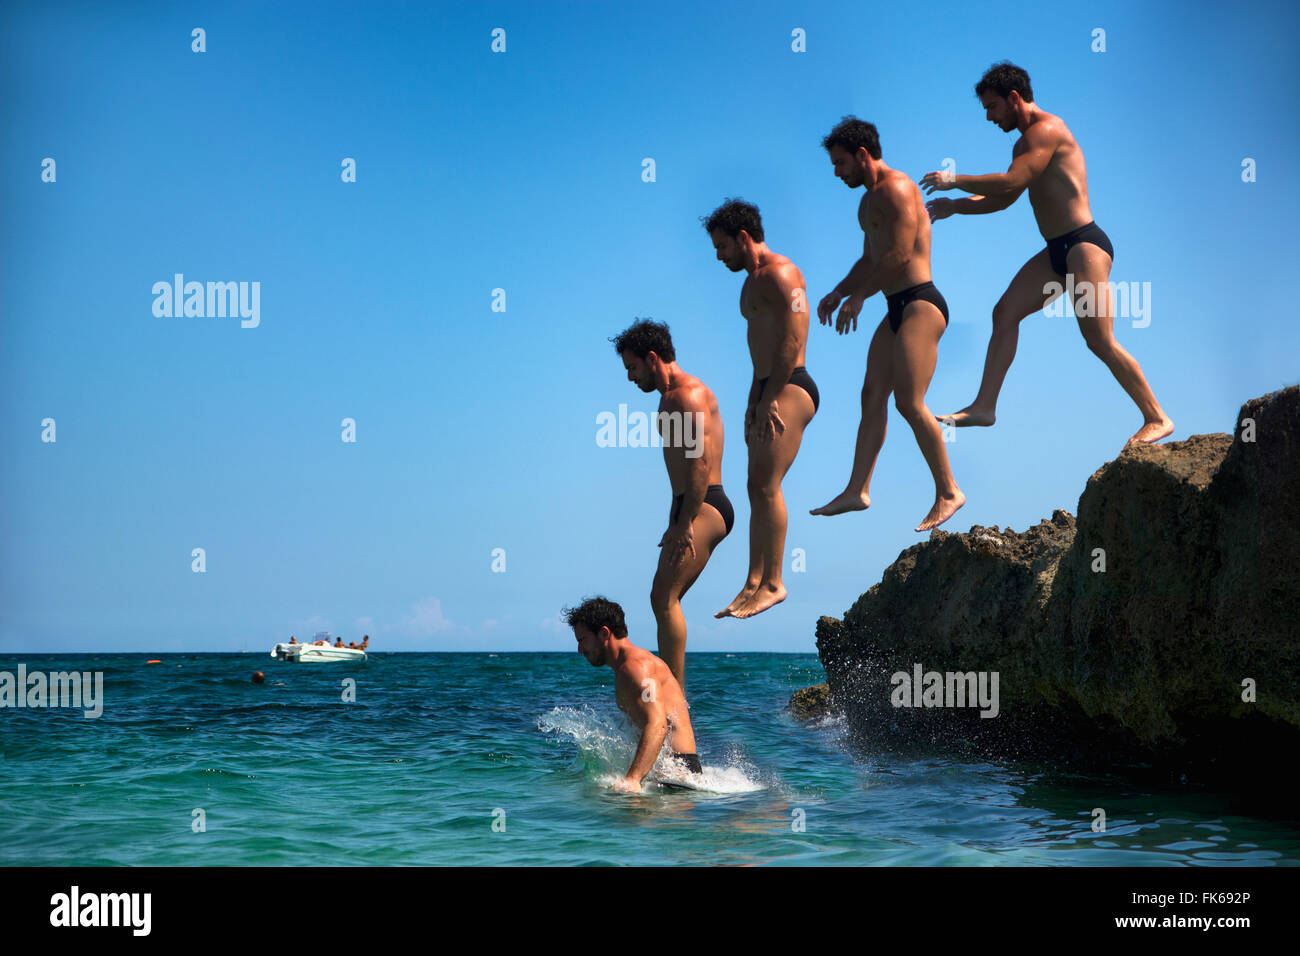 Man jumping from cliff in water. Summertime. Stock Photo